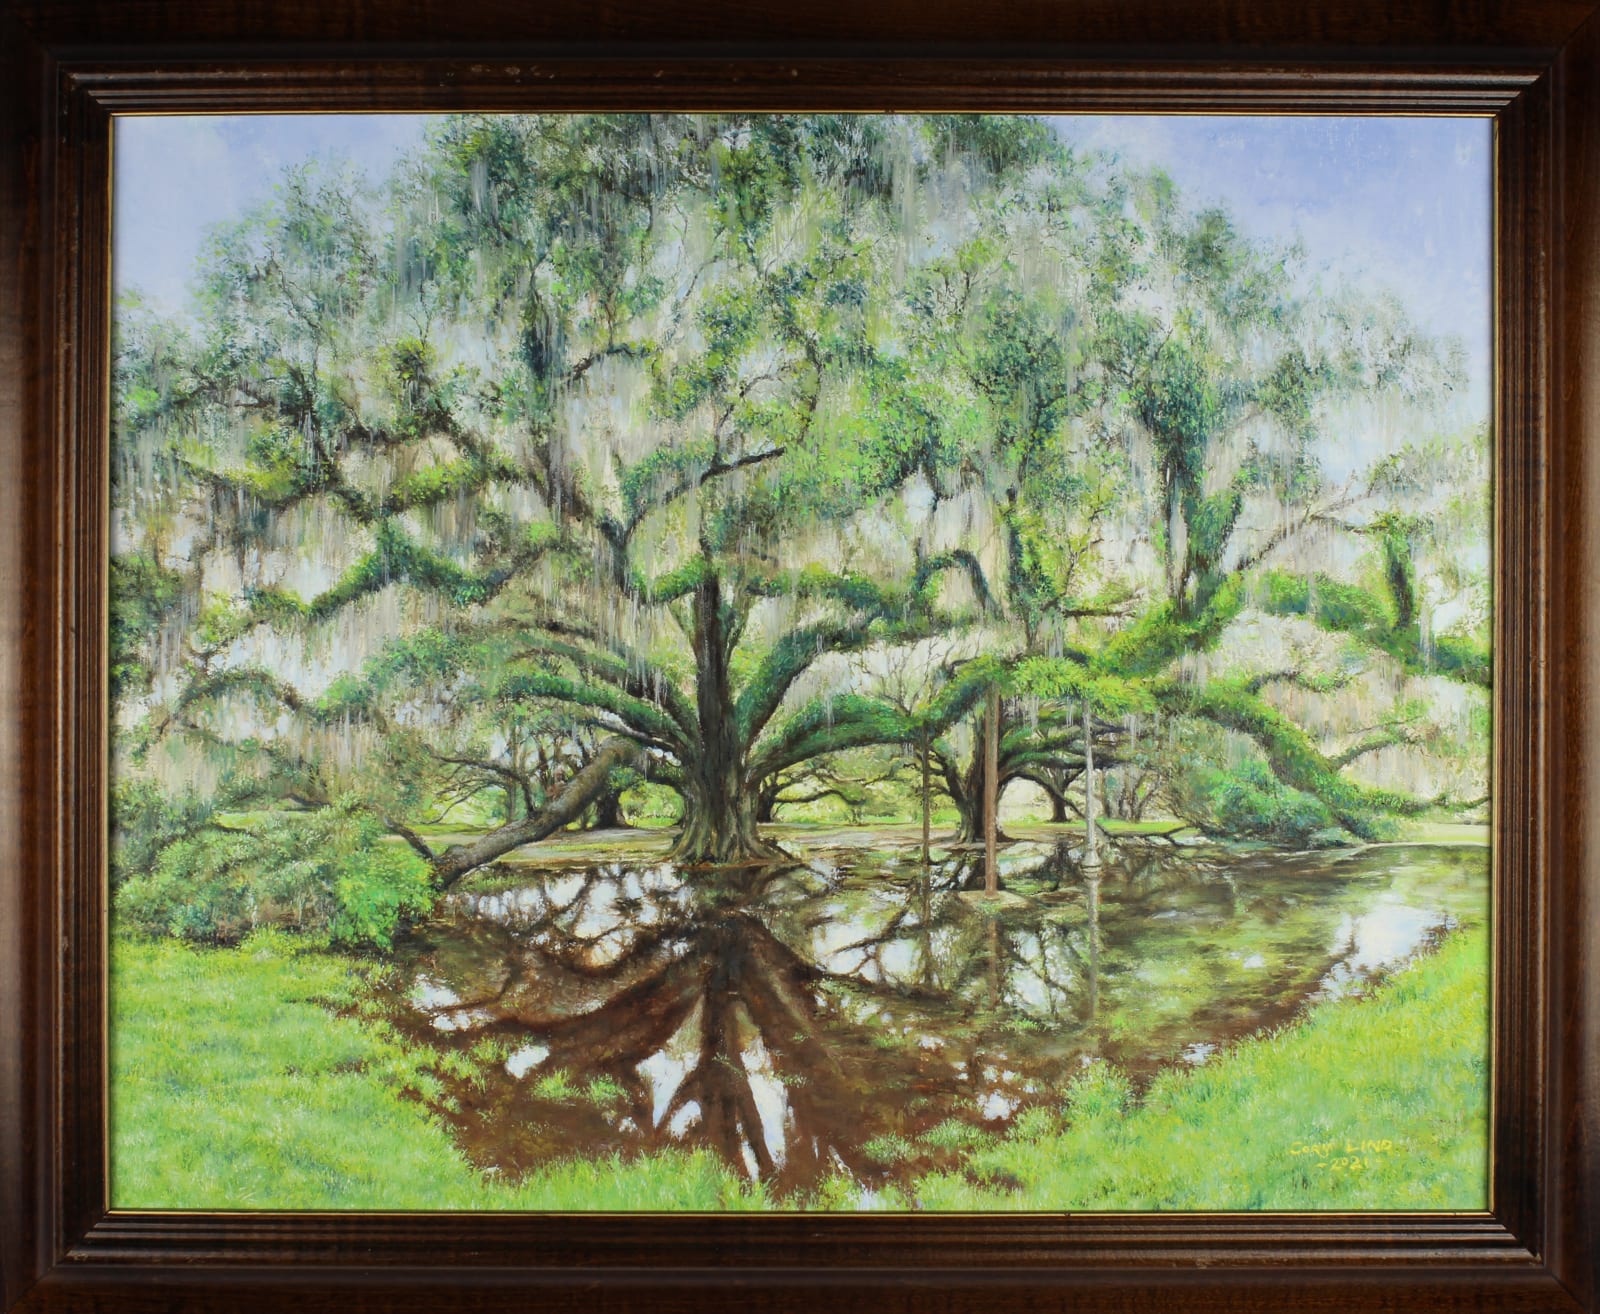 Adult 3rd Place $400 CORY LIND (ADULT) SPIRIT TREES [30] Oil on canvas